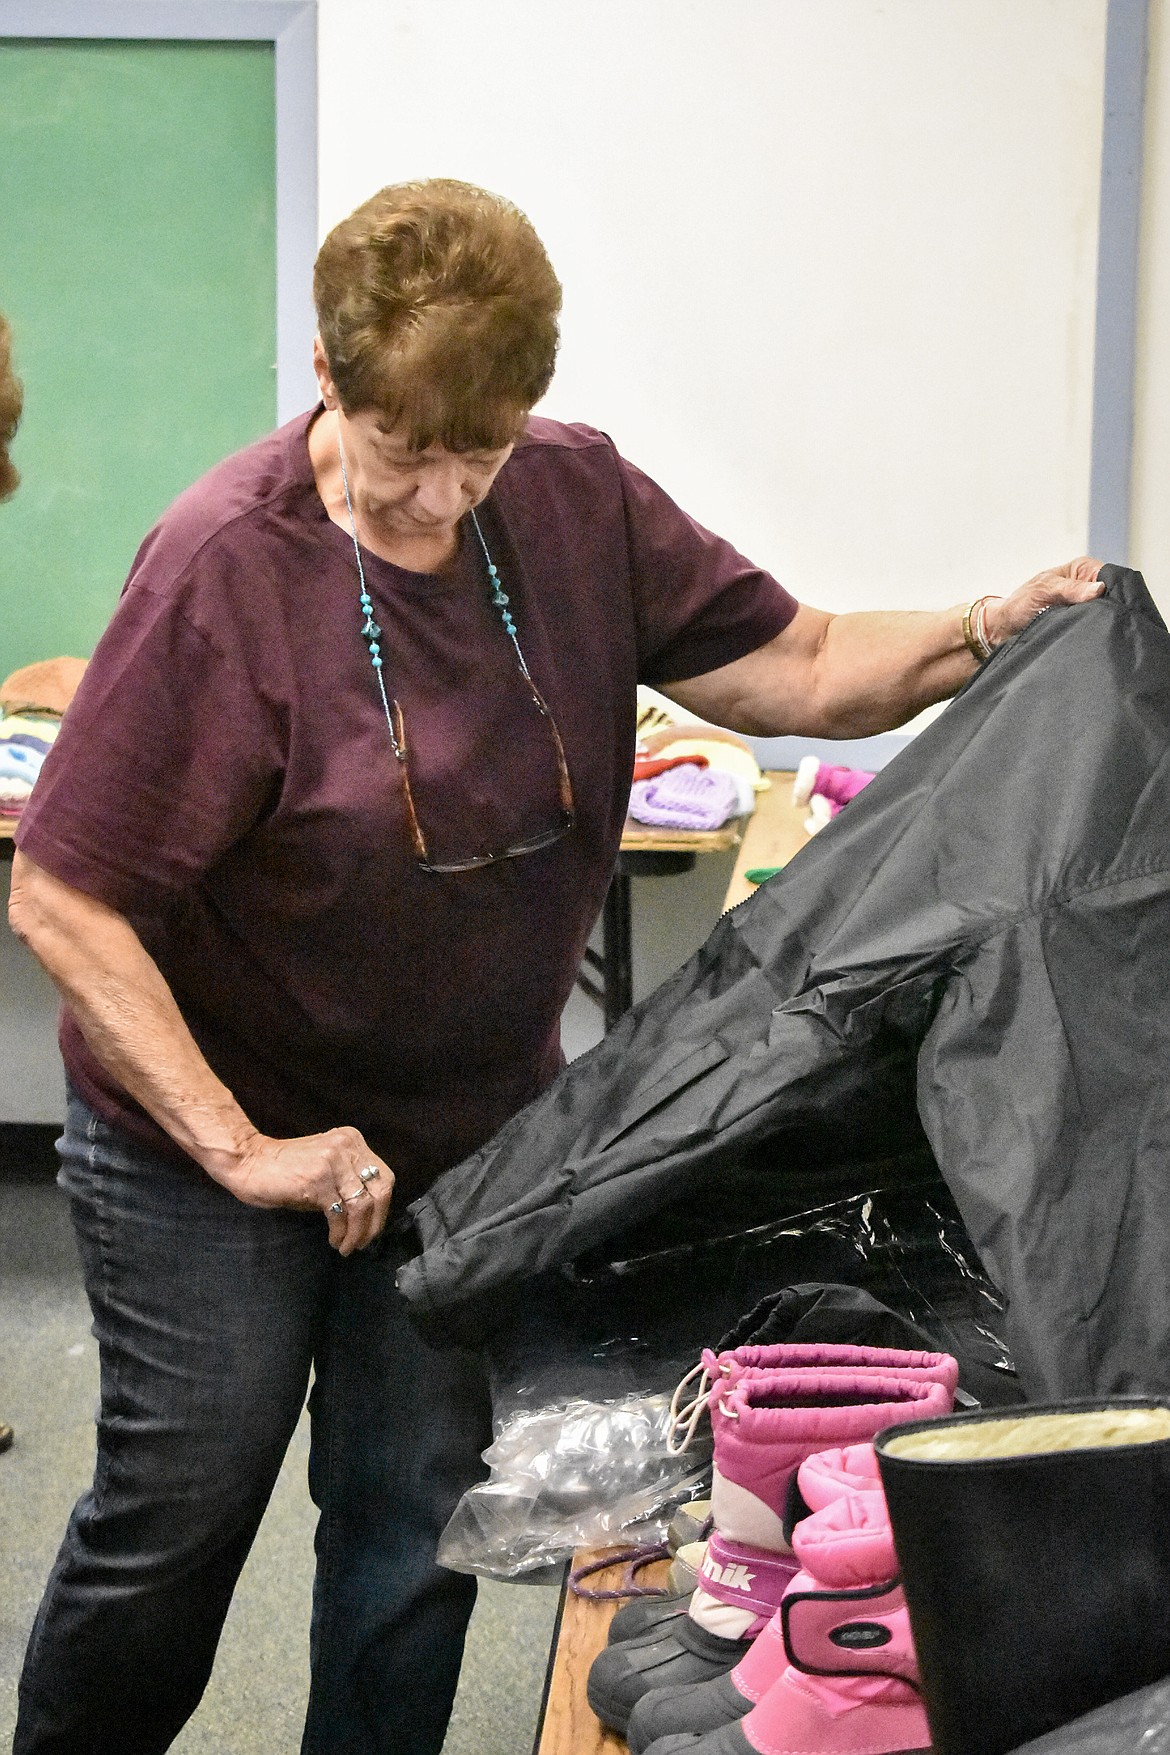 Connie Thomson, who came to volunteer for the Student Stand Down Aug. 20, looks at a coat in the Koats for Kids room before the Stand Down gets started. Kooteani Kiwanis president Pam Peppenger said Koats for Kids gave away around 200 pieces of winter wear during the Stand Down, including 100 coats. 
(Ben Kibbey/The Western News)